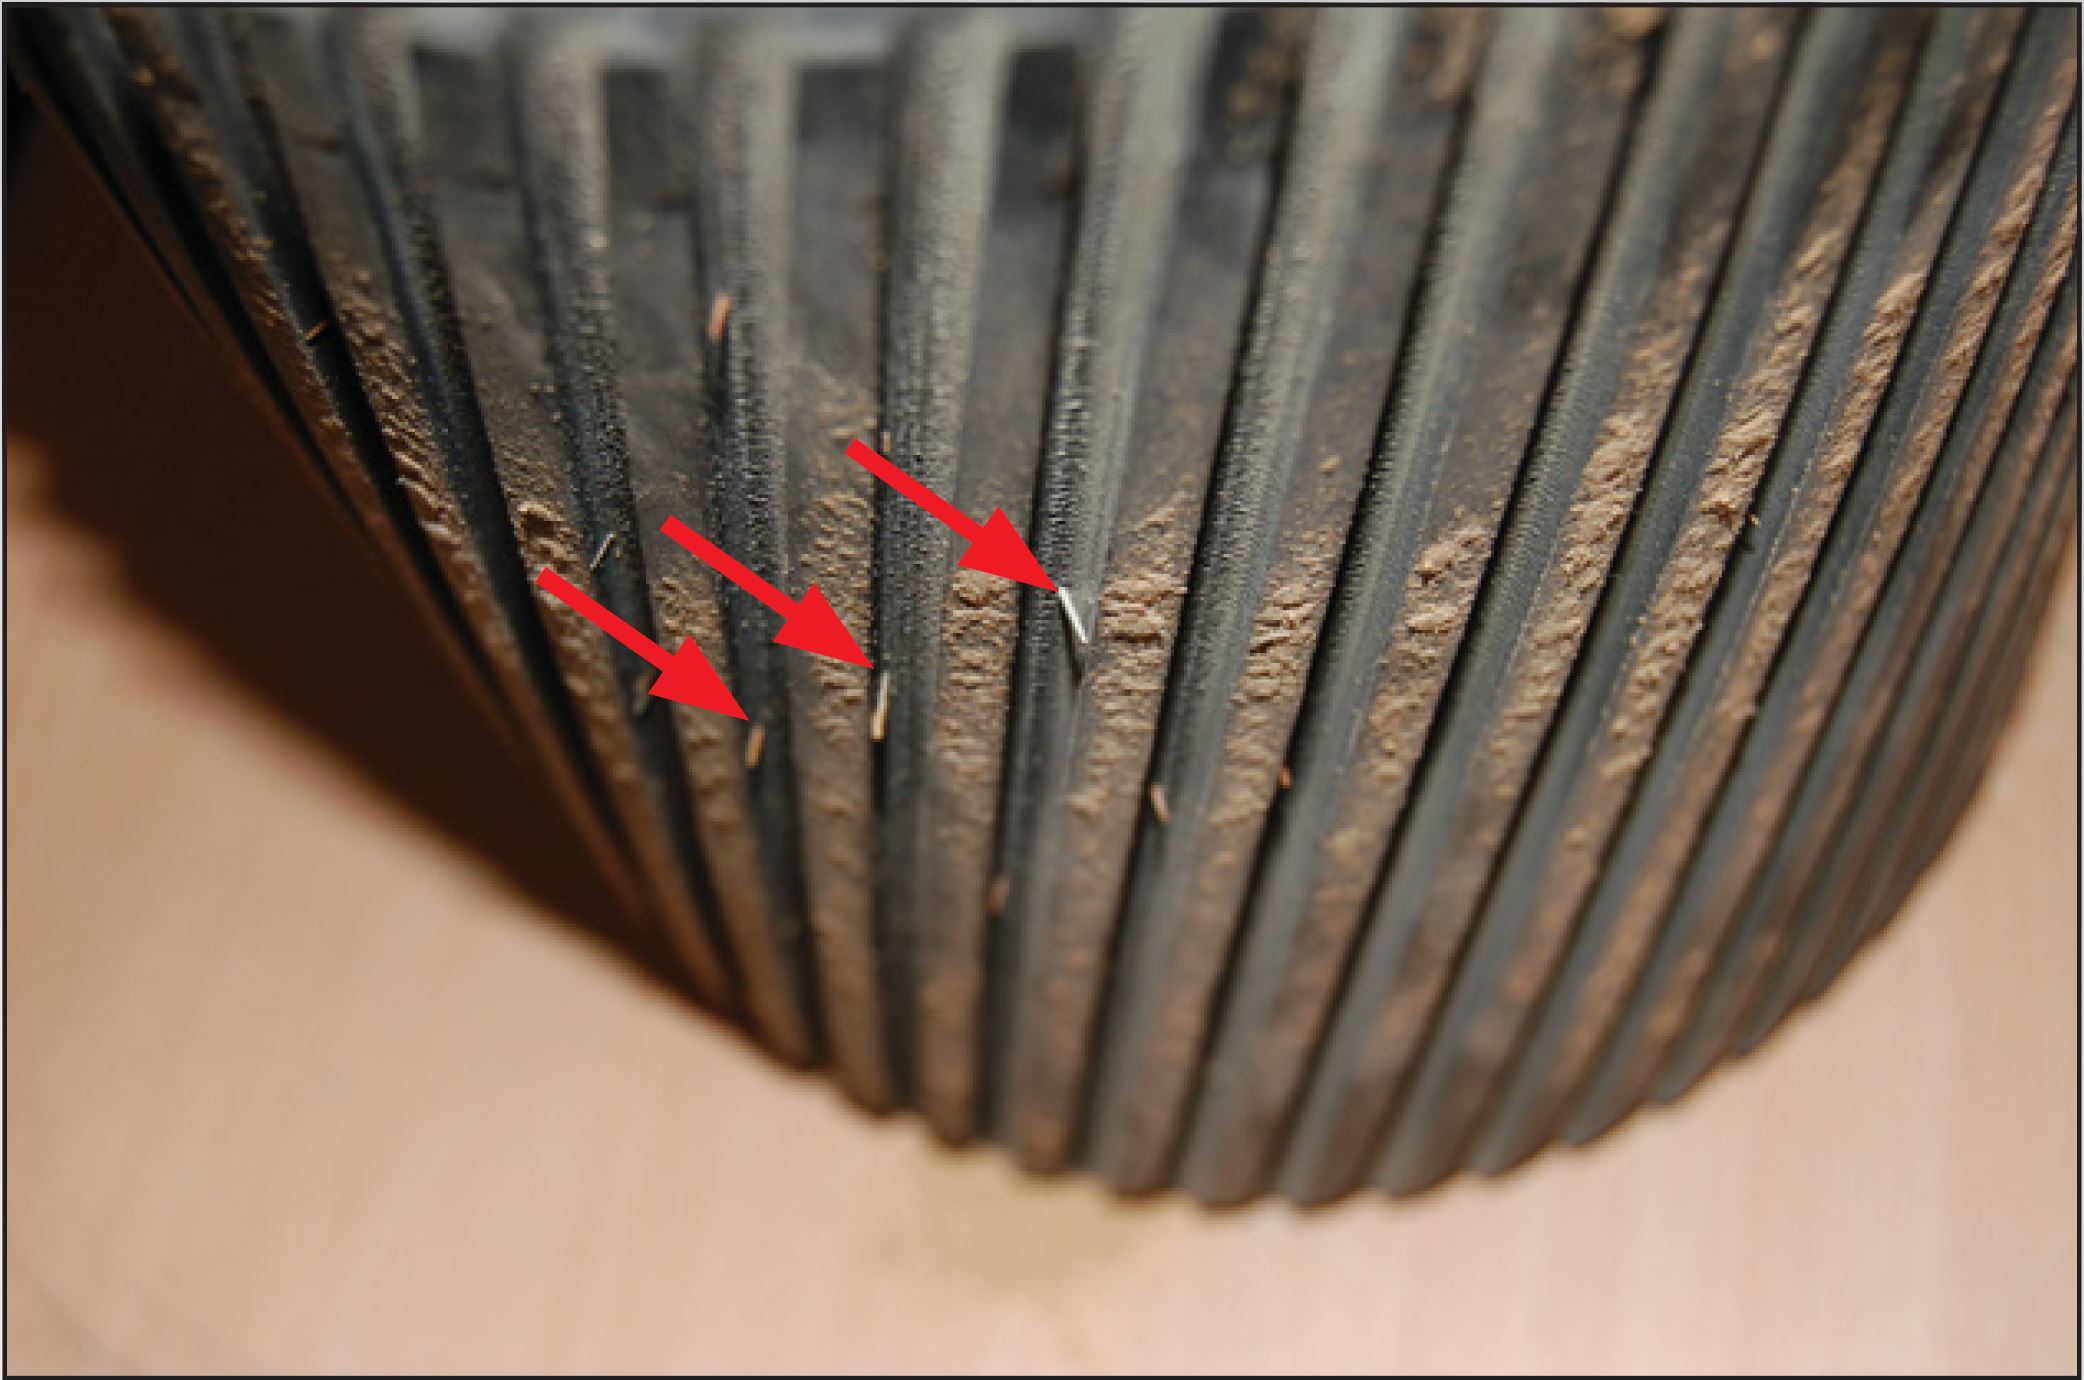 Sanding Drum Damaged by Sharp Objects